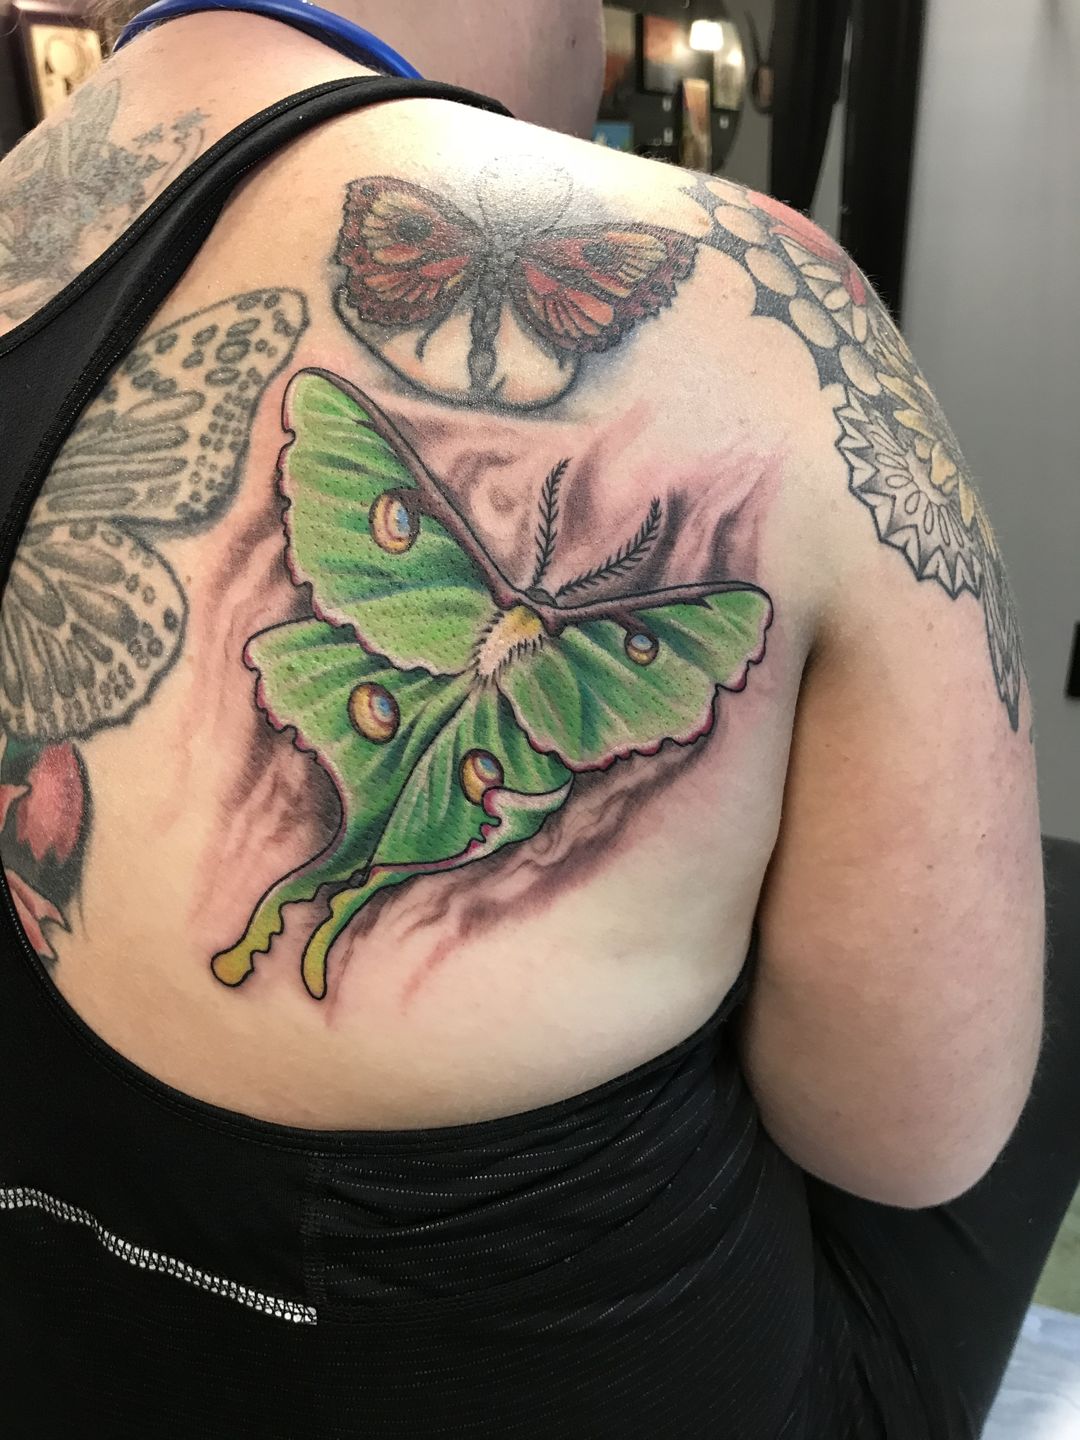 My new luna moth by Erin in Asheville NC  My man and I got each other  tats for a christmas present  rtattoo